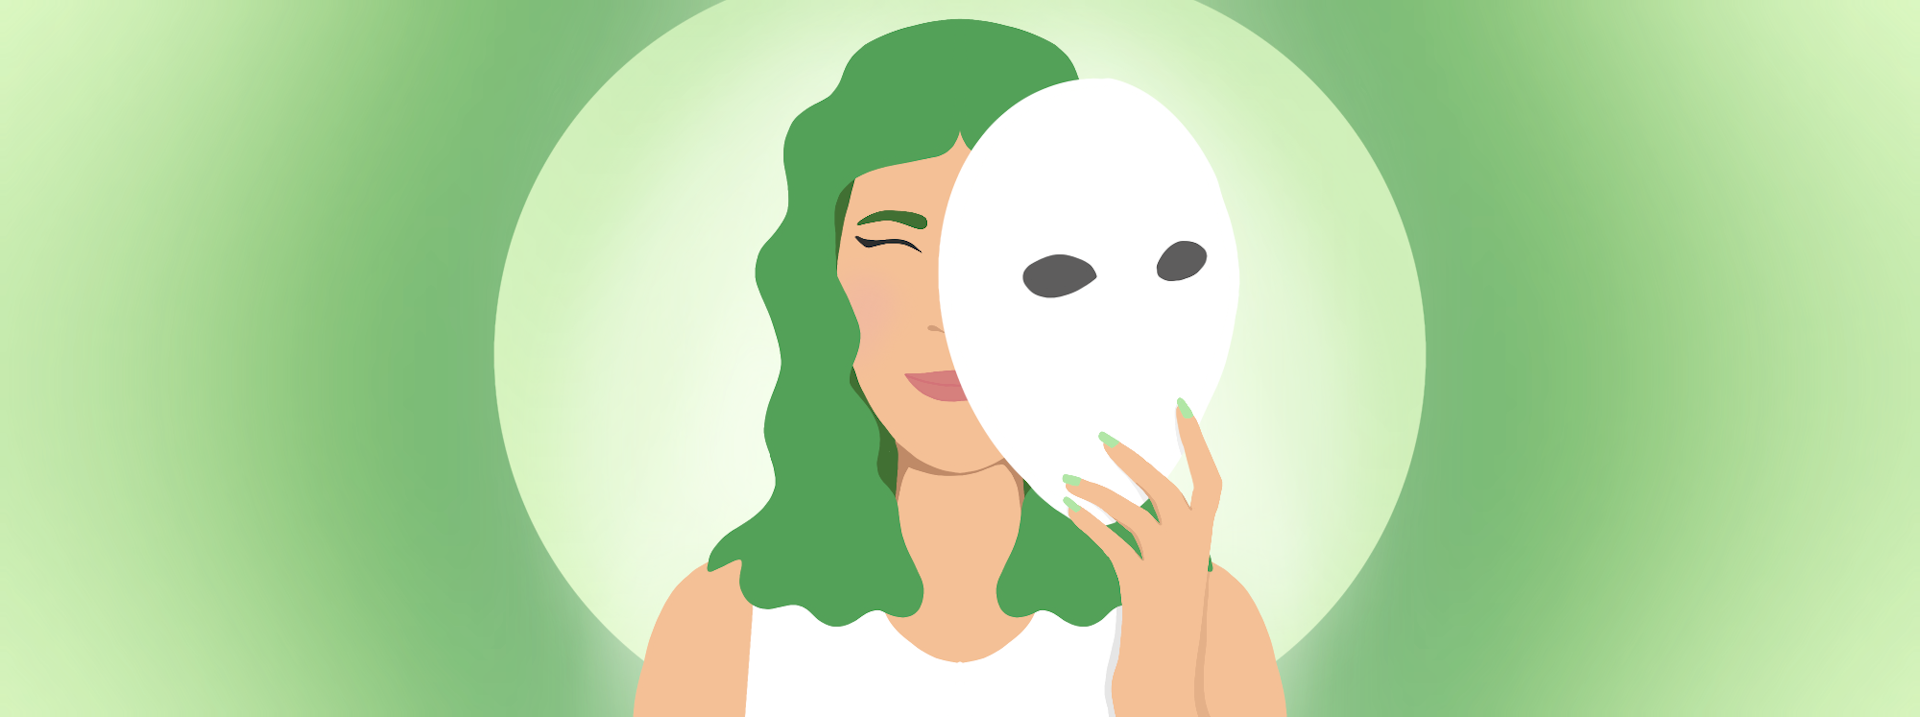 Illustration of a person revealing their face from behind a mask.